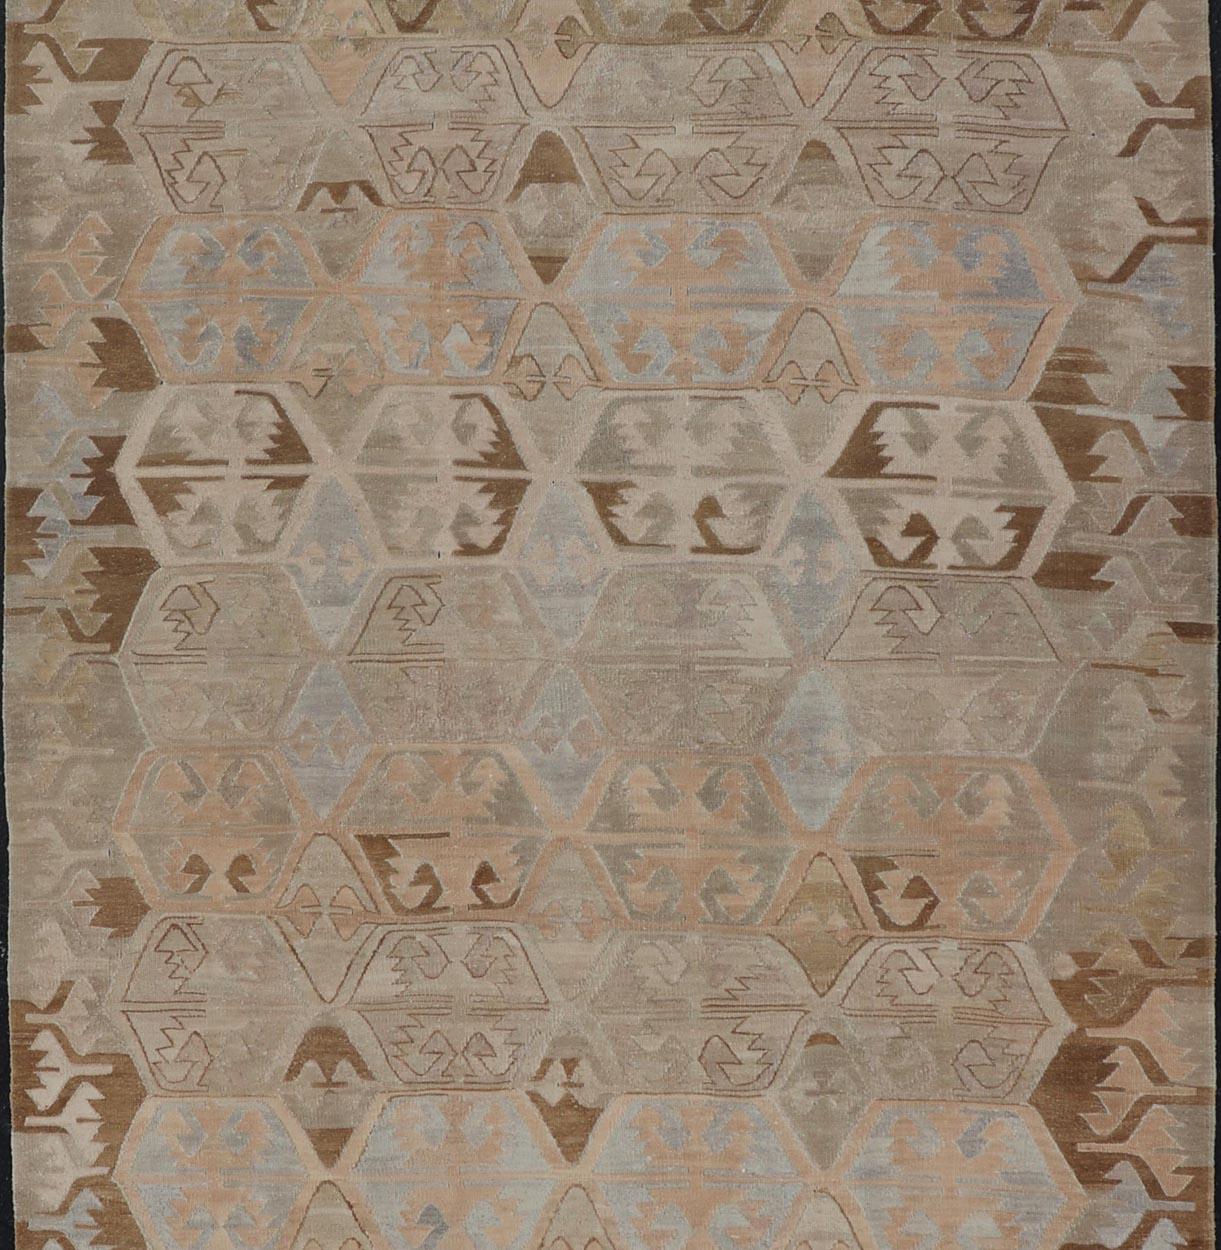 This flat-weave tribal Turkish kilim has been hand-woven in wool. The rug features an all-over sub-geometric design, rendered in grays blues and earthy tones; making this rug a superb fit for a wide variety of interiors.

Vintage Kilim Rug with